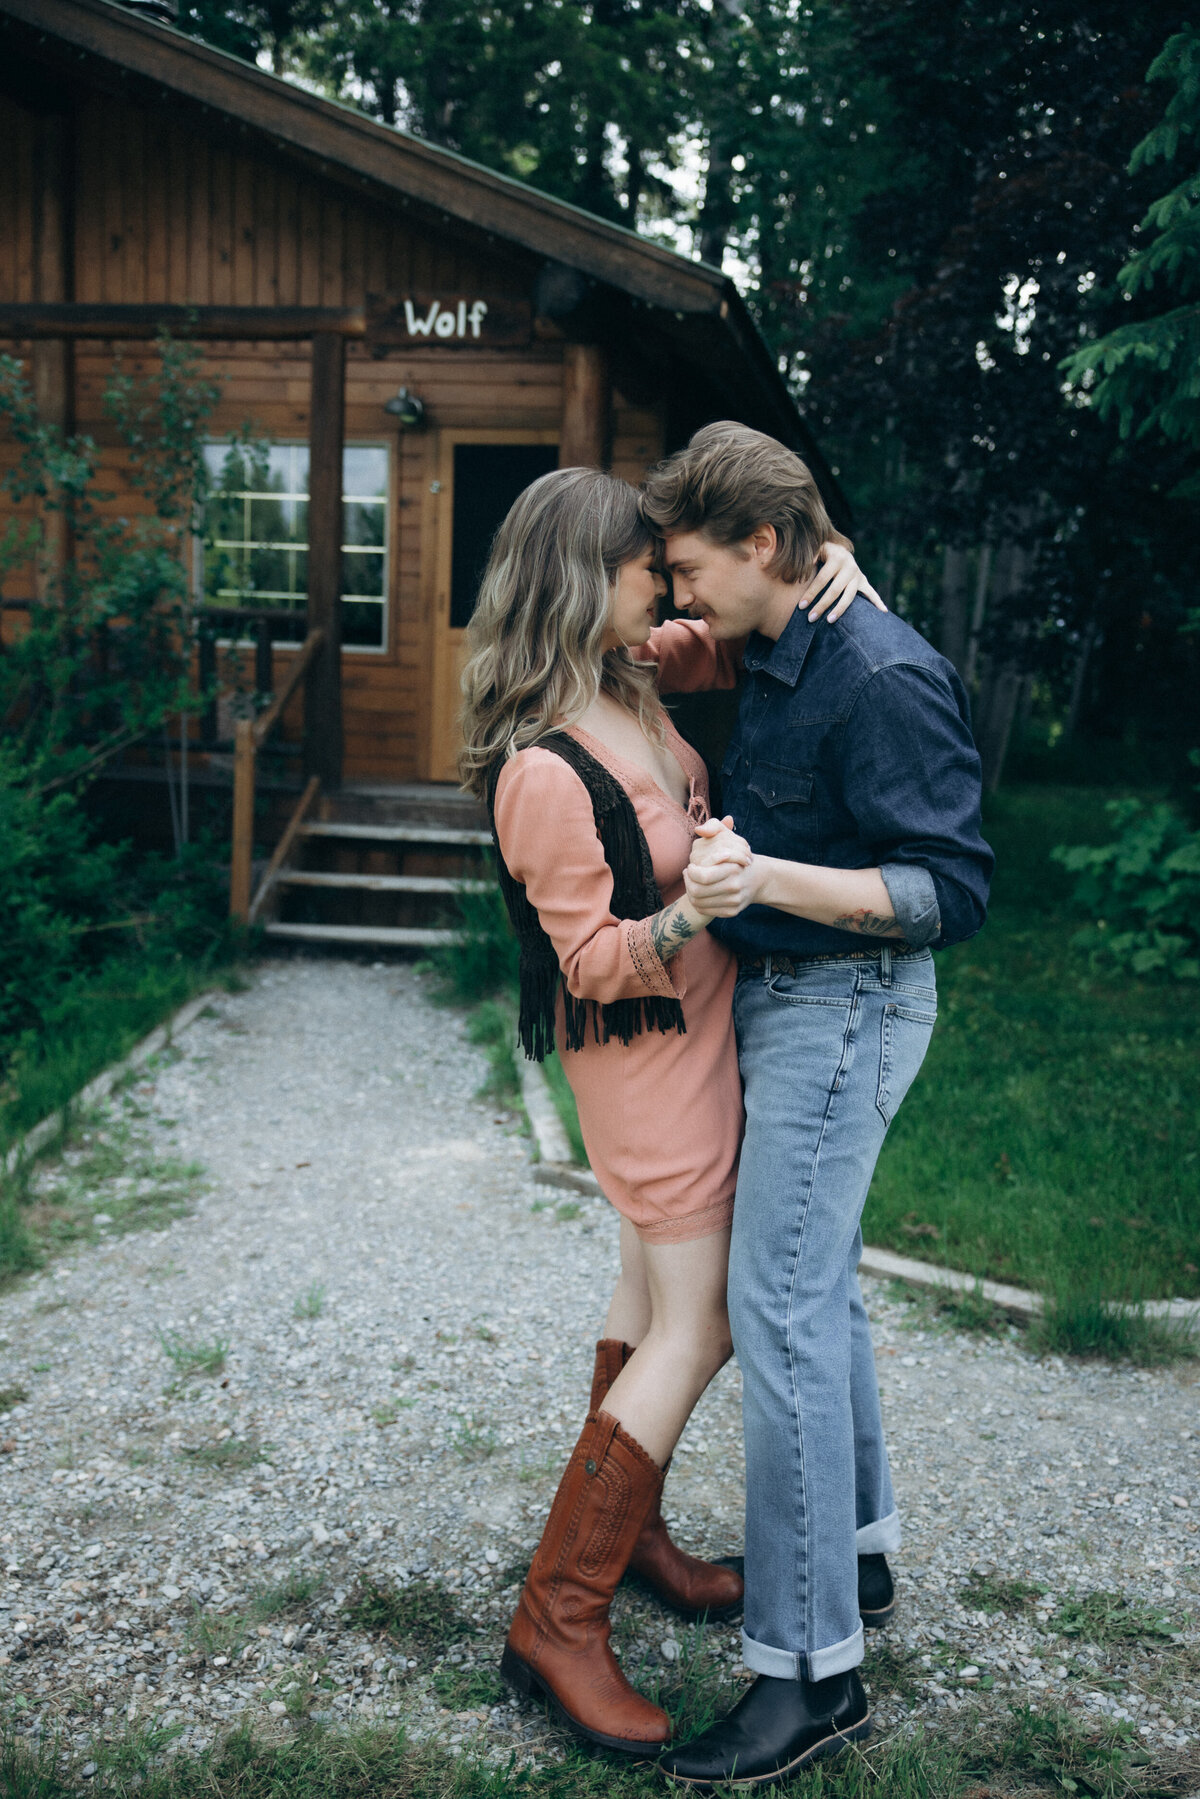 vpc-couples-vintage-cabin-shoot-8